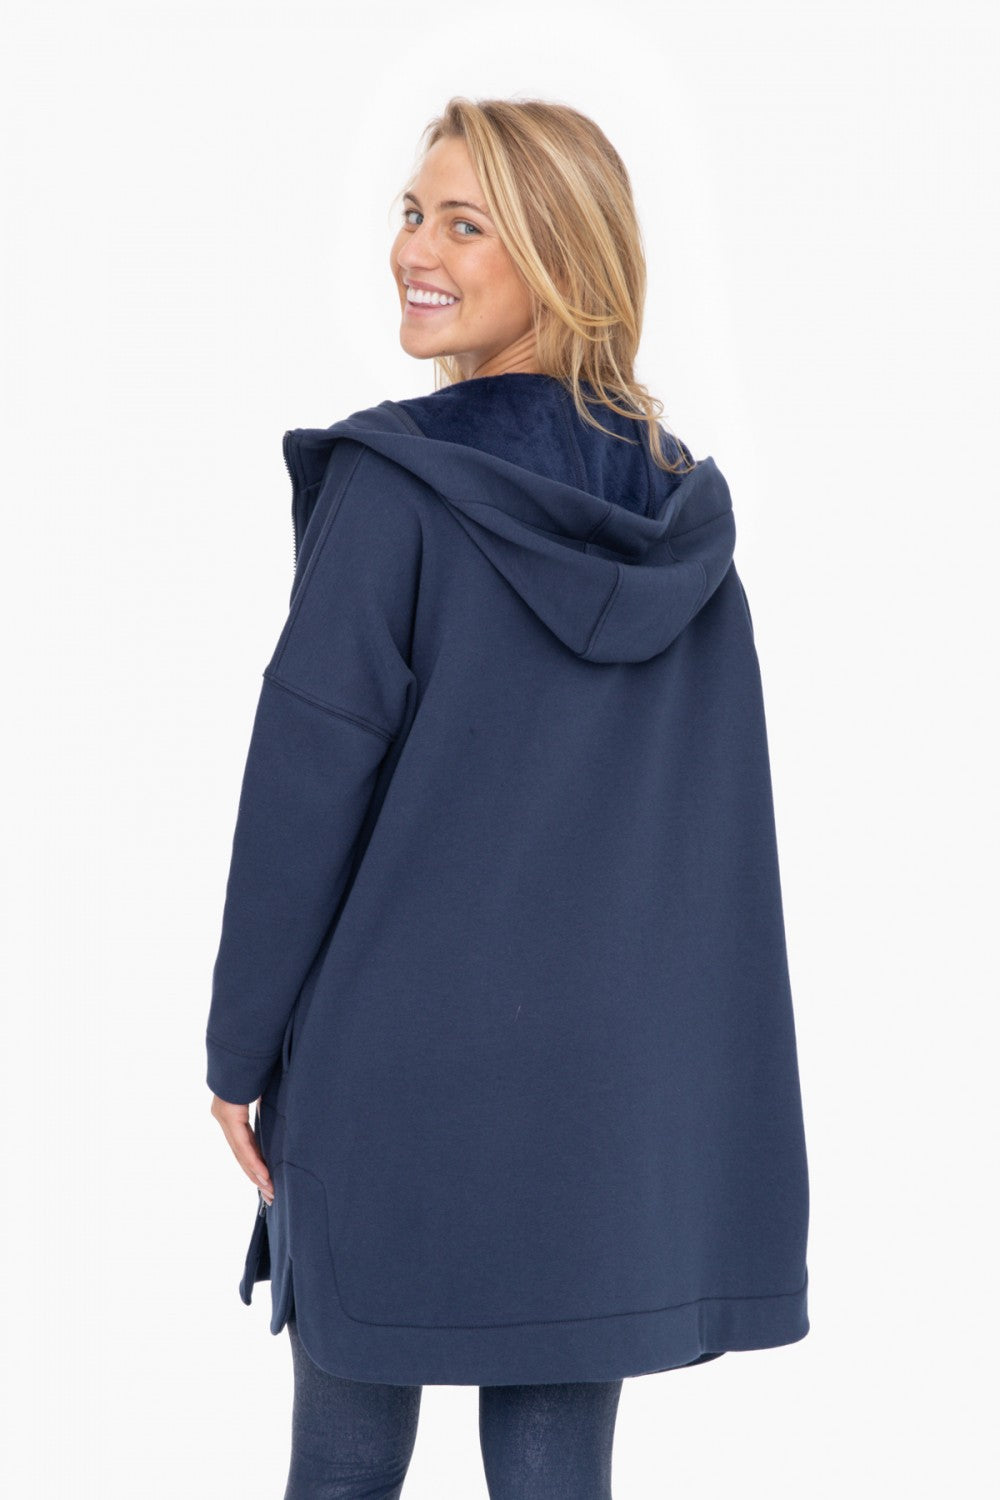 Cozy-up Long Line Hooded Jacket / 2 colors